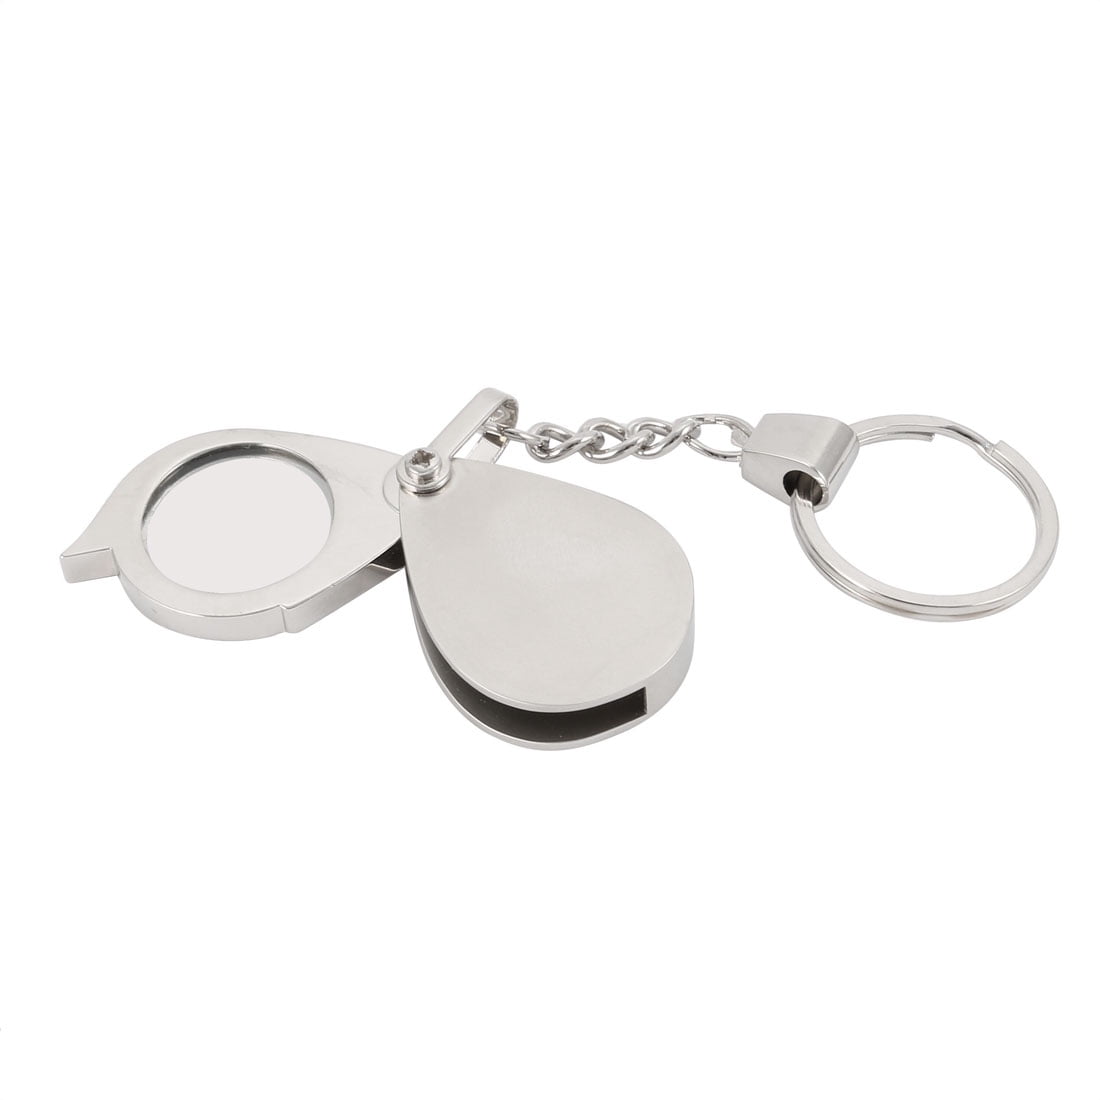 Portable 15X Folding Key Ring Magnifier Key Chain Magnifying Glass Loupe SS6 